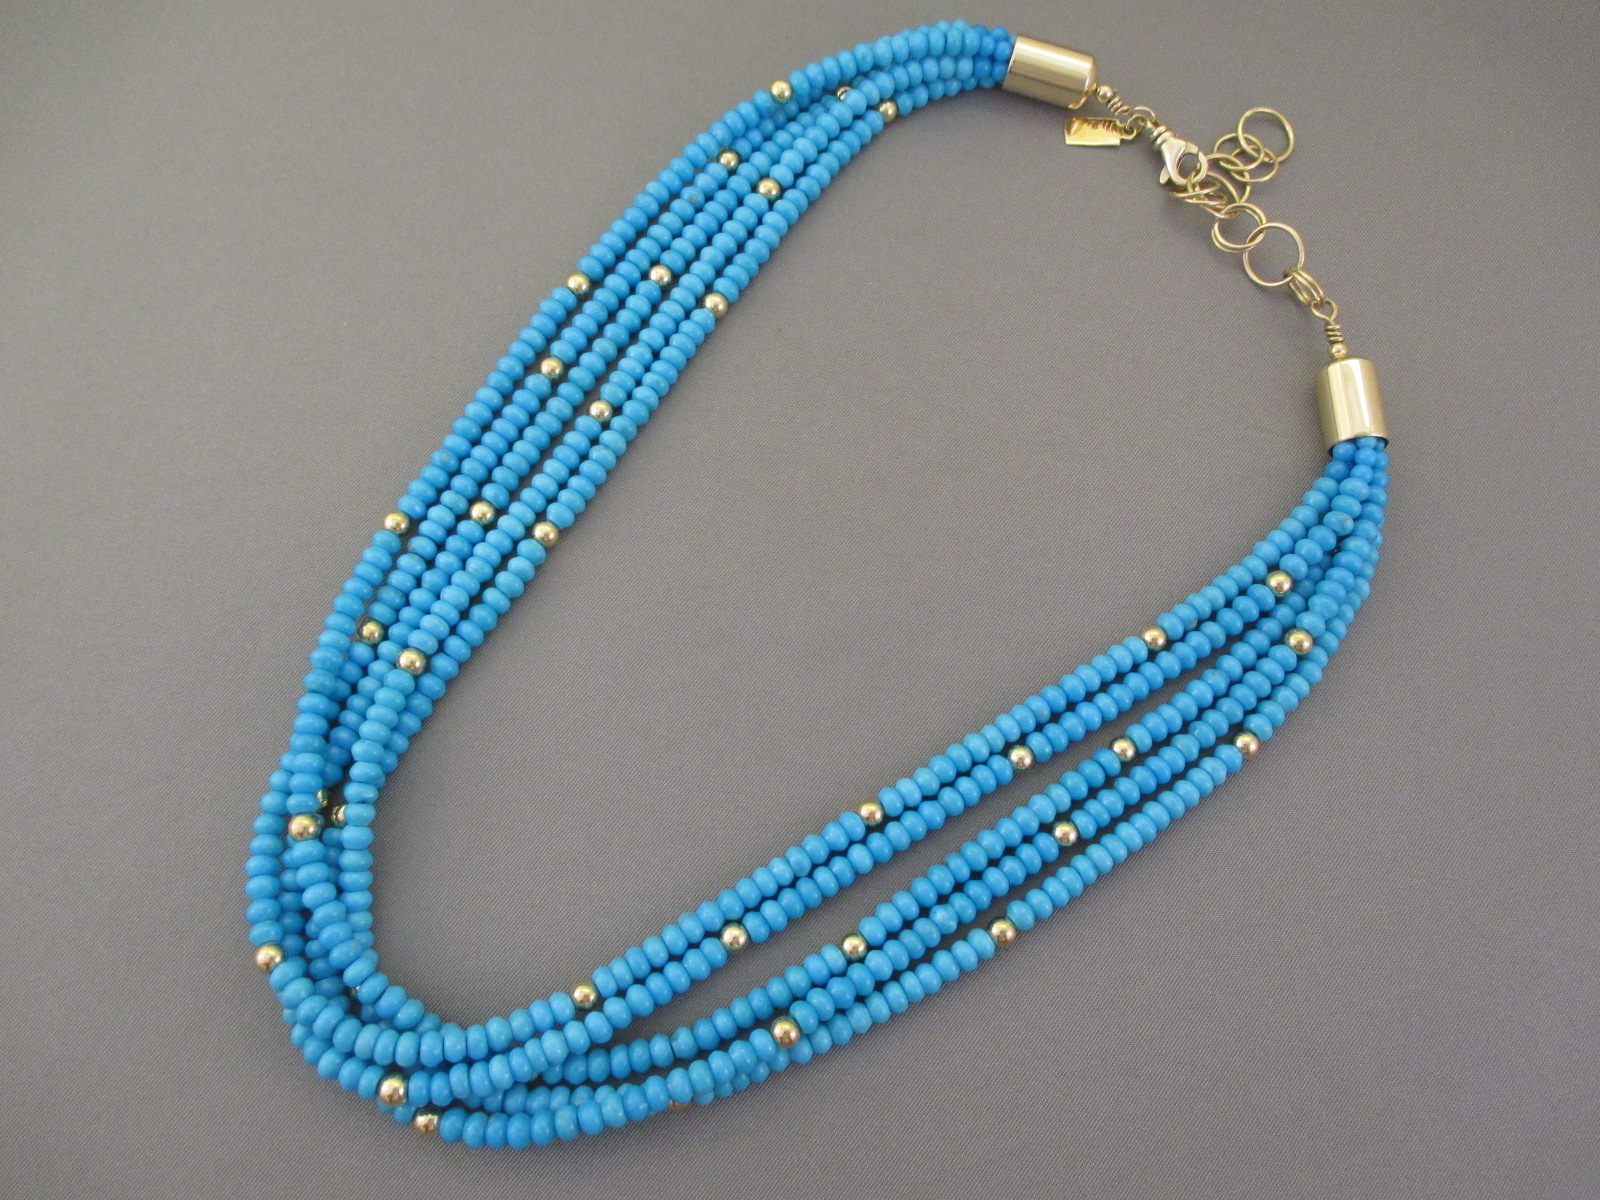 turquoise jewelry necklace